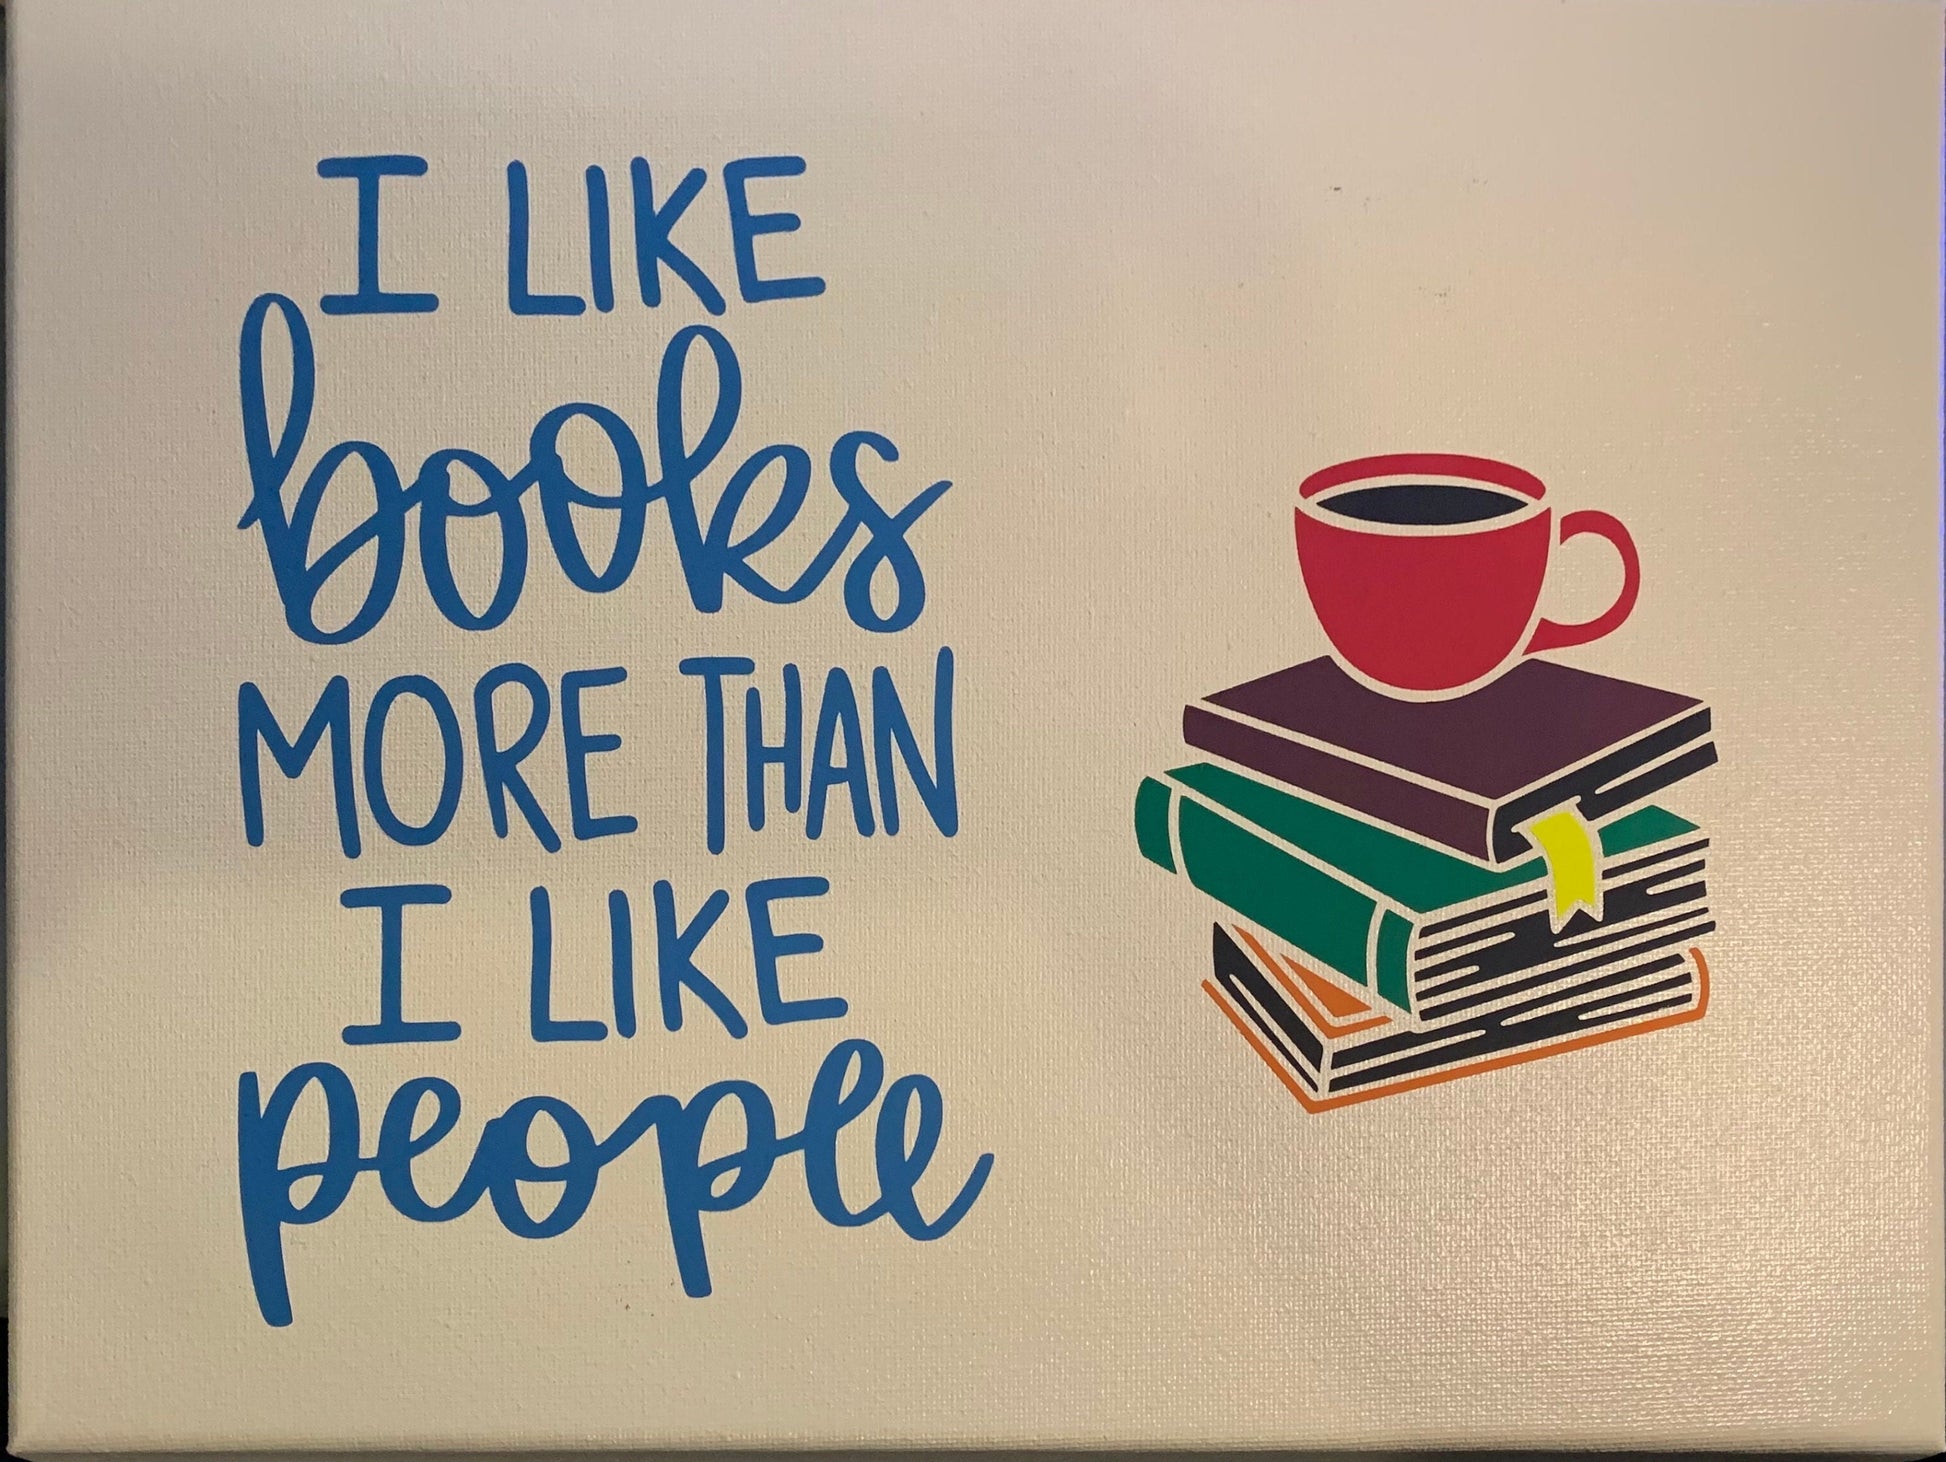 l like Books More Than People 9x12 Vinyl Canvas Sign blue, green